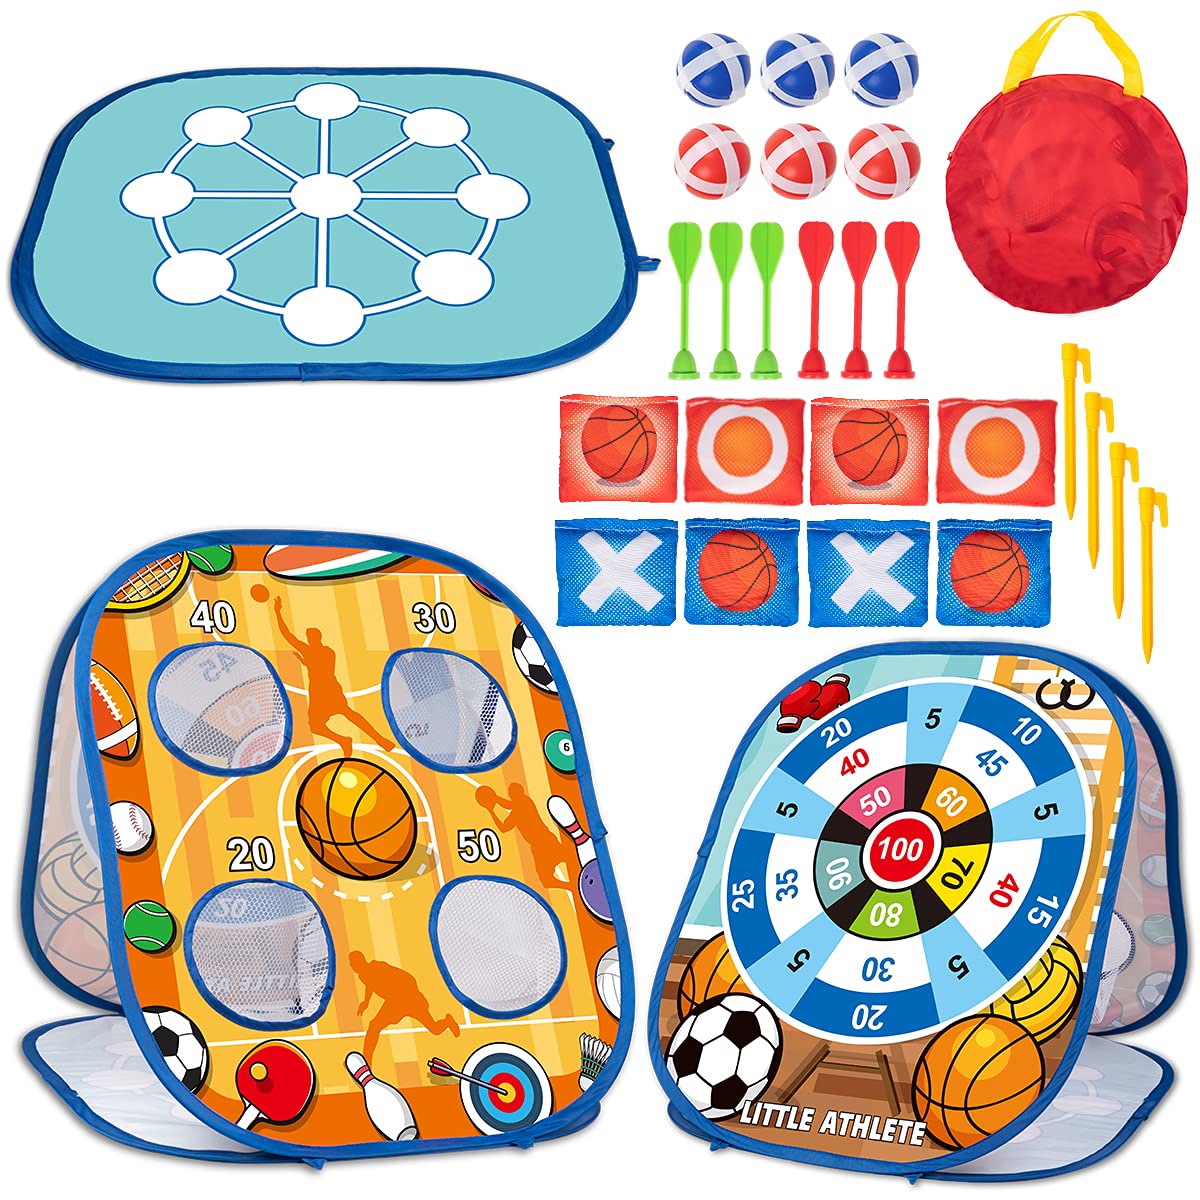 Joyshare 3 in 1 Bean Bag Toss game Set for Kids, Outside Toys for Kids Toddlers Ages 3-5 4-8 4-7, collapsible cornhole and Dart Board wit